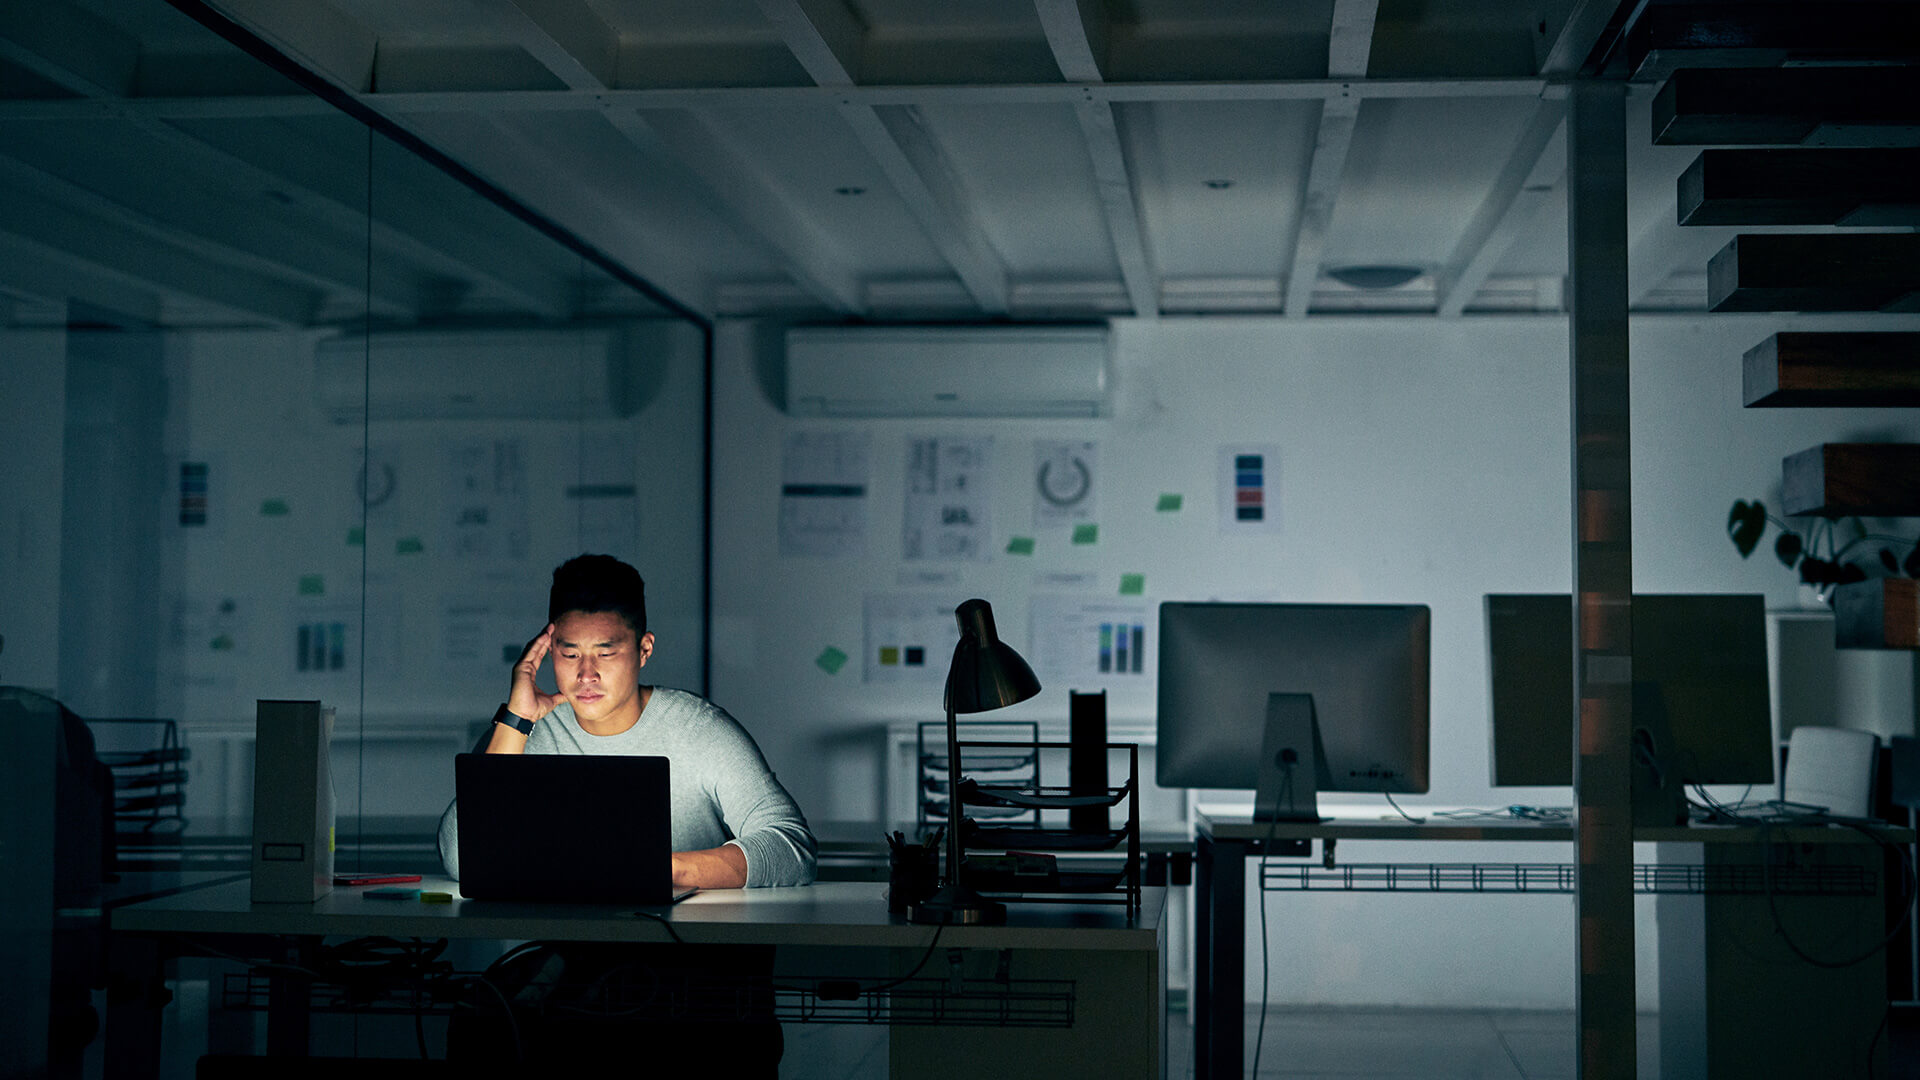 man working alone on a computer in a dimly lit room